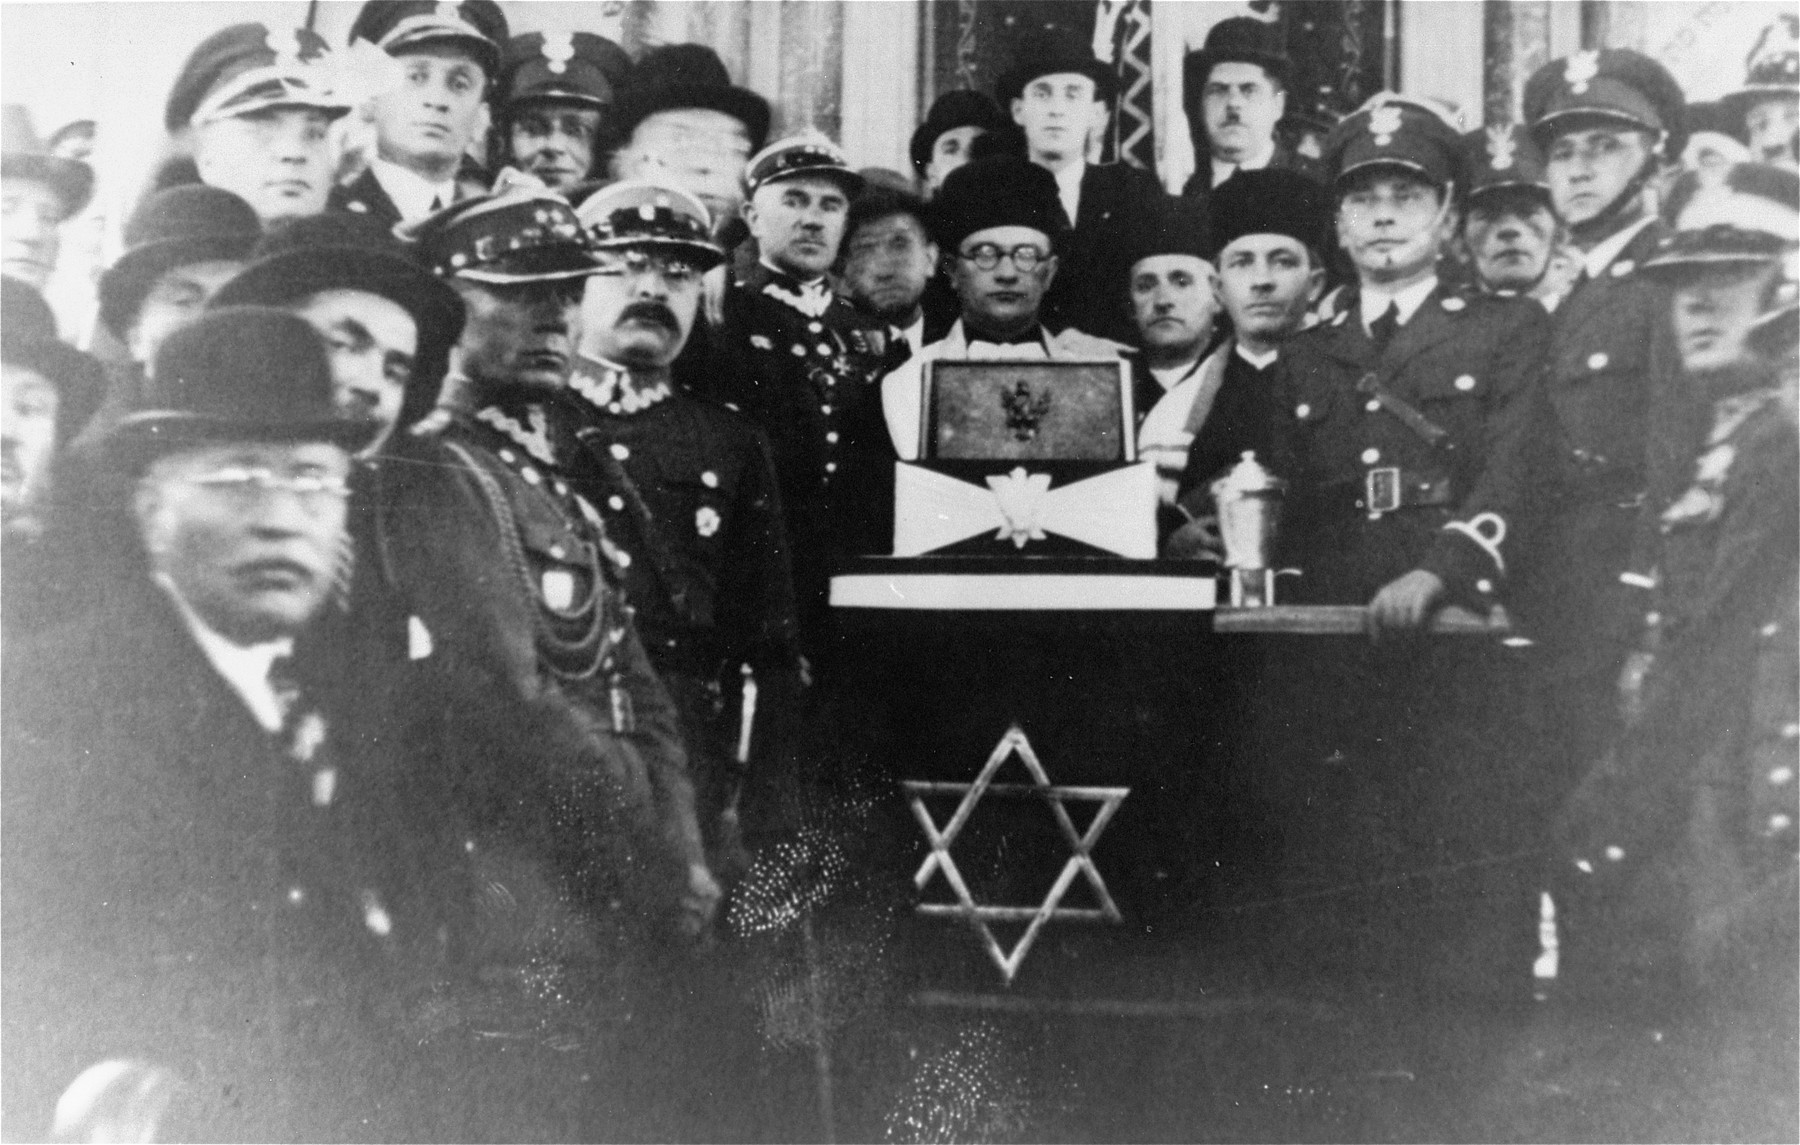 Chief Rabbi of the Polish Army, Boruch Steinberg poses with a group of Polish officers in a Krakow synagogue.

Rabbi Steinberg was later killed in Katyn massacre.